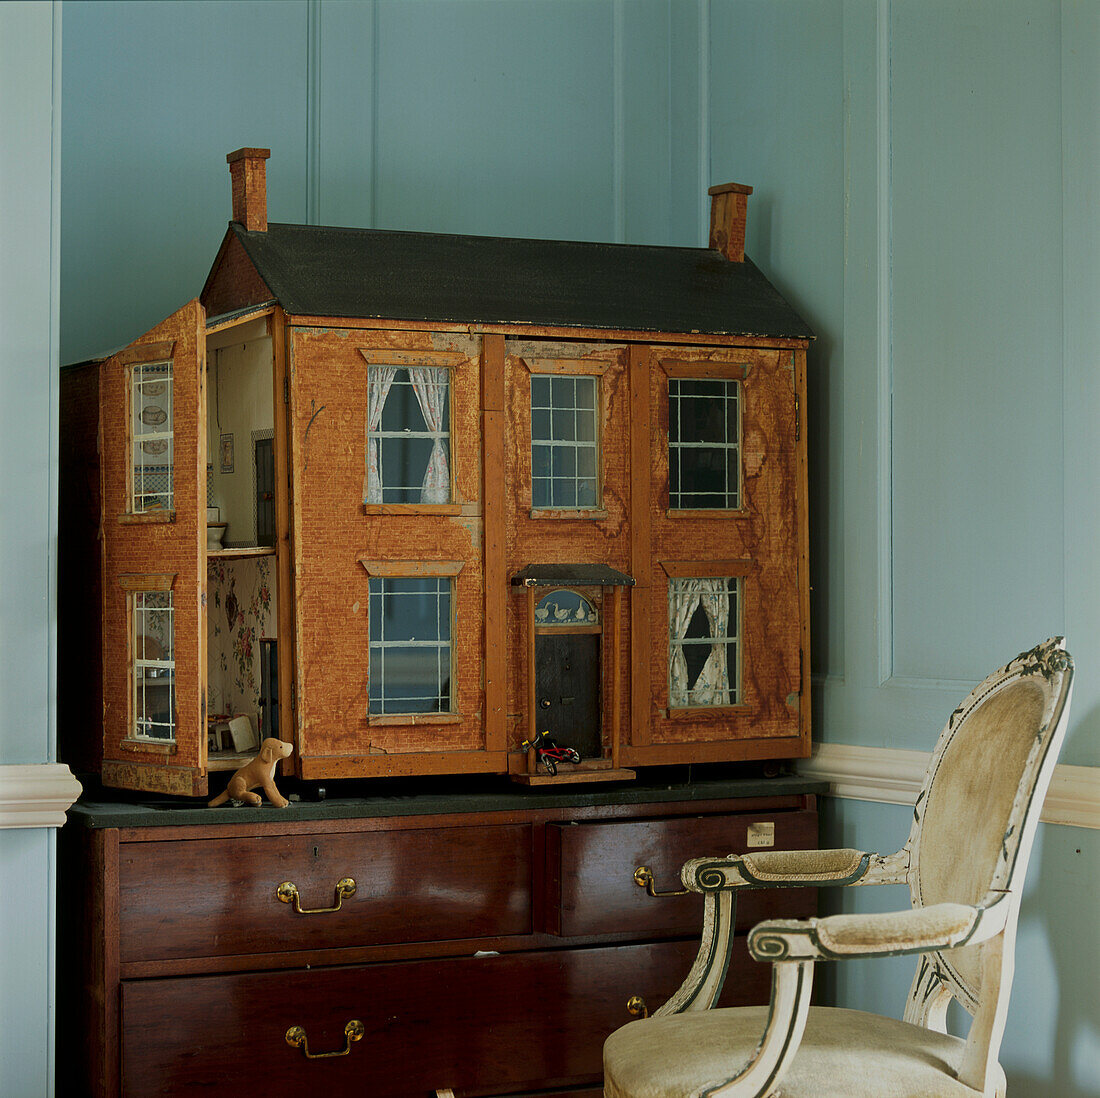 Dolls House with furniture